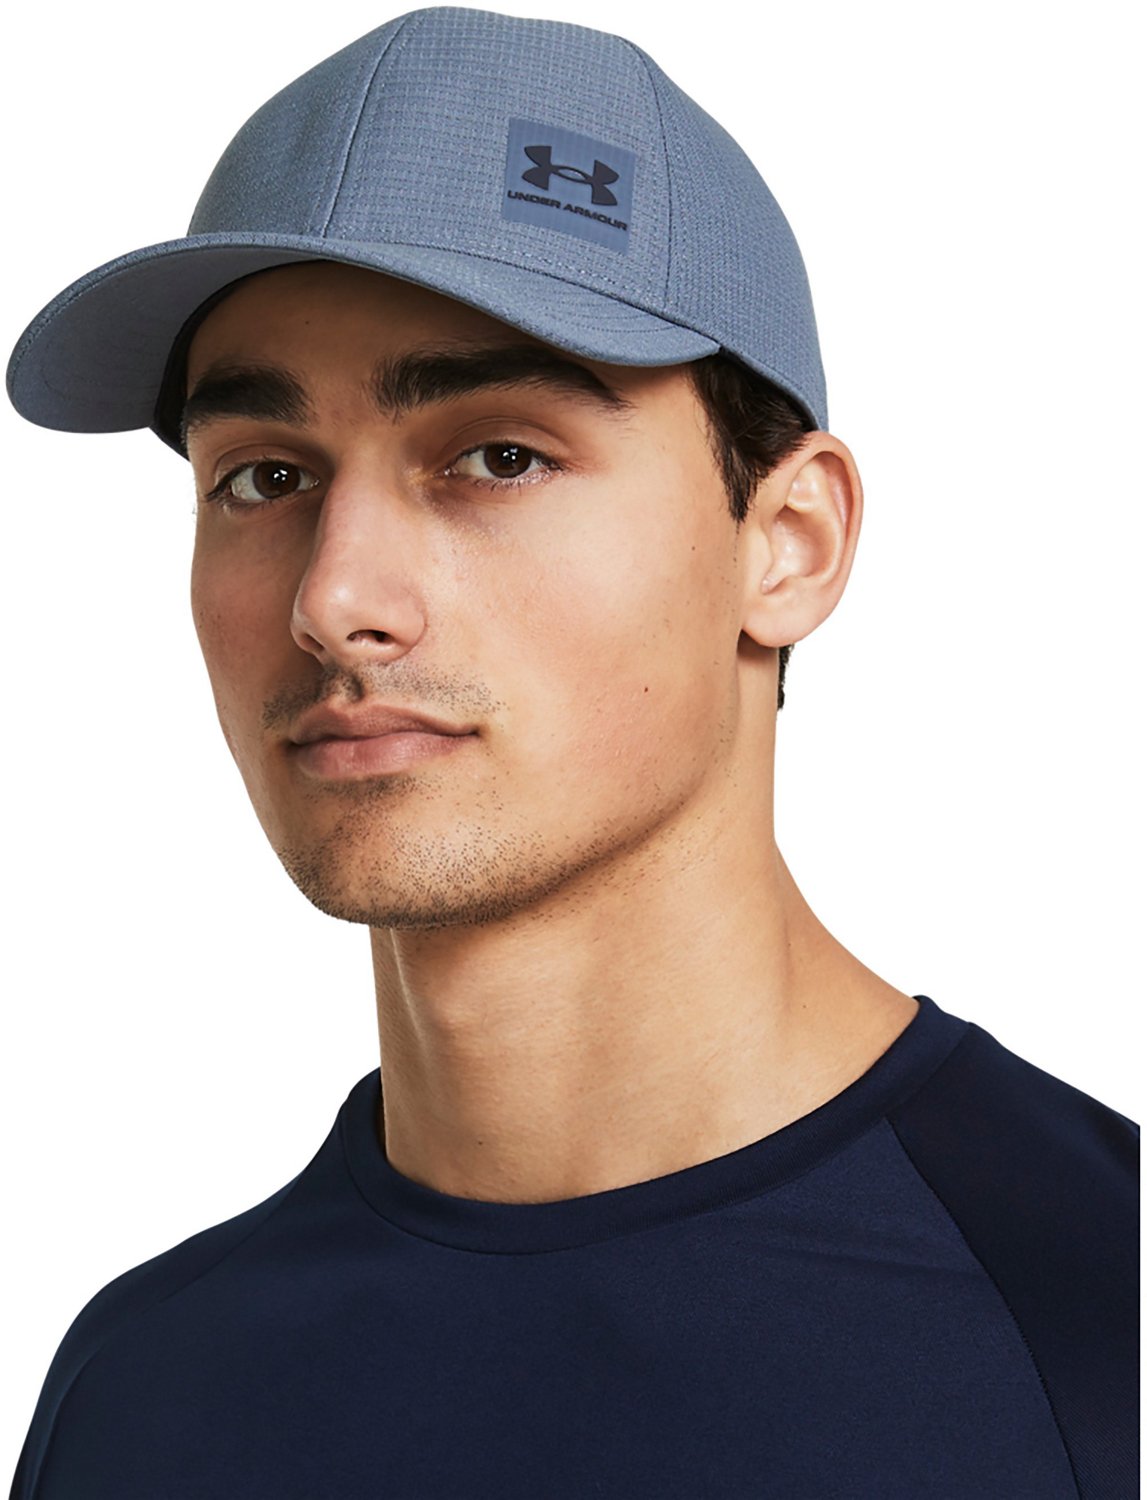 Under Armour Mens Iso-Chill ArmourVent Stretch Fit Hat